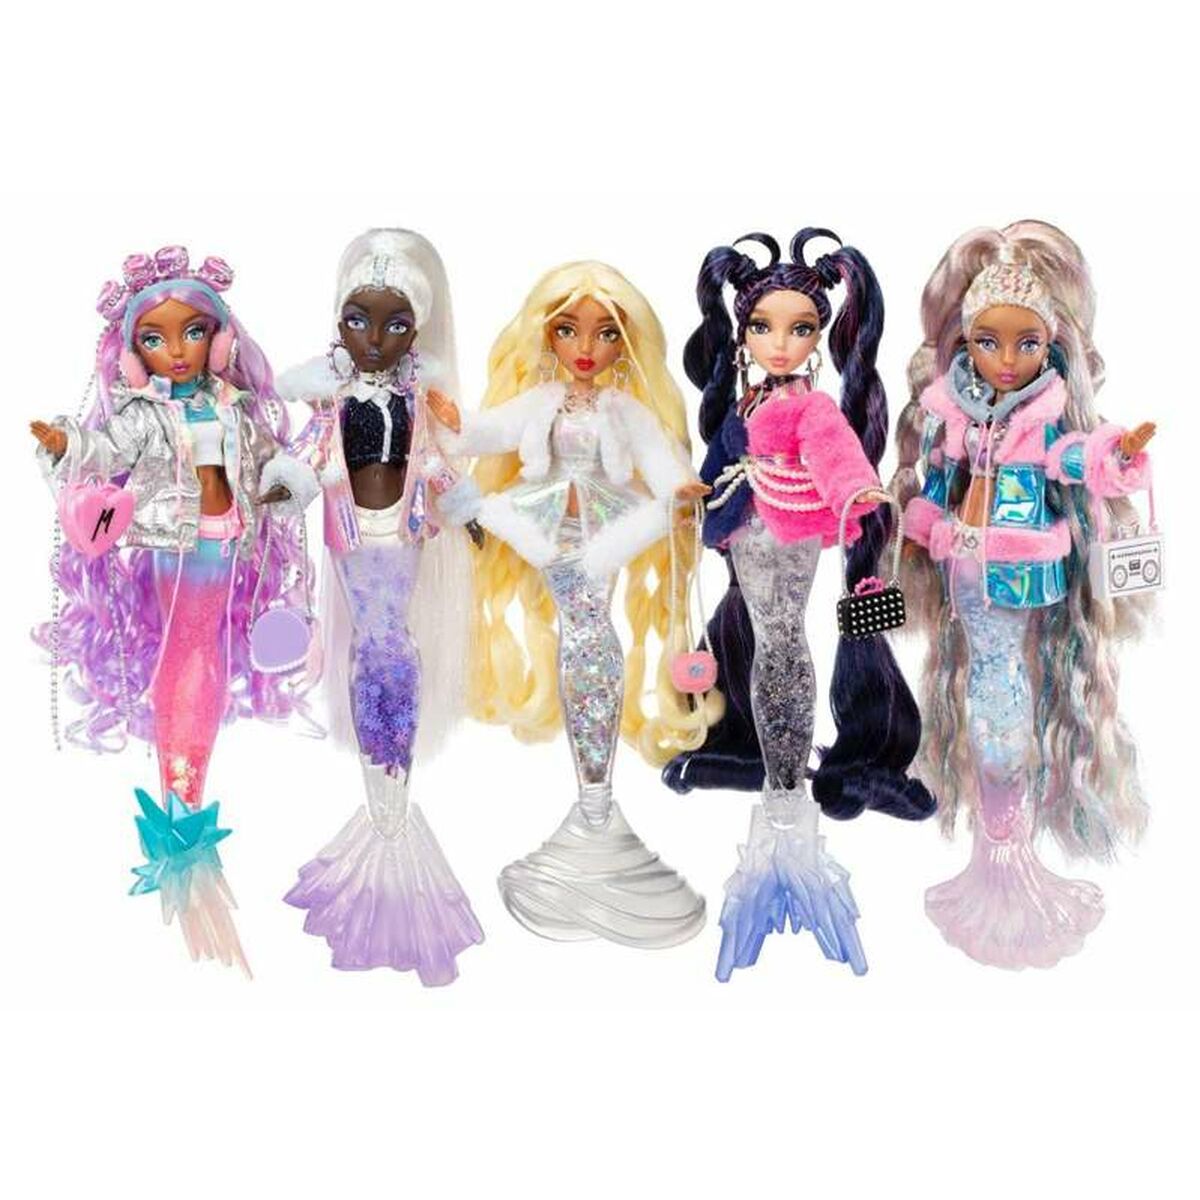 Dolls, Doll Houses & Doll Accessories